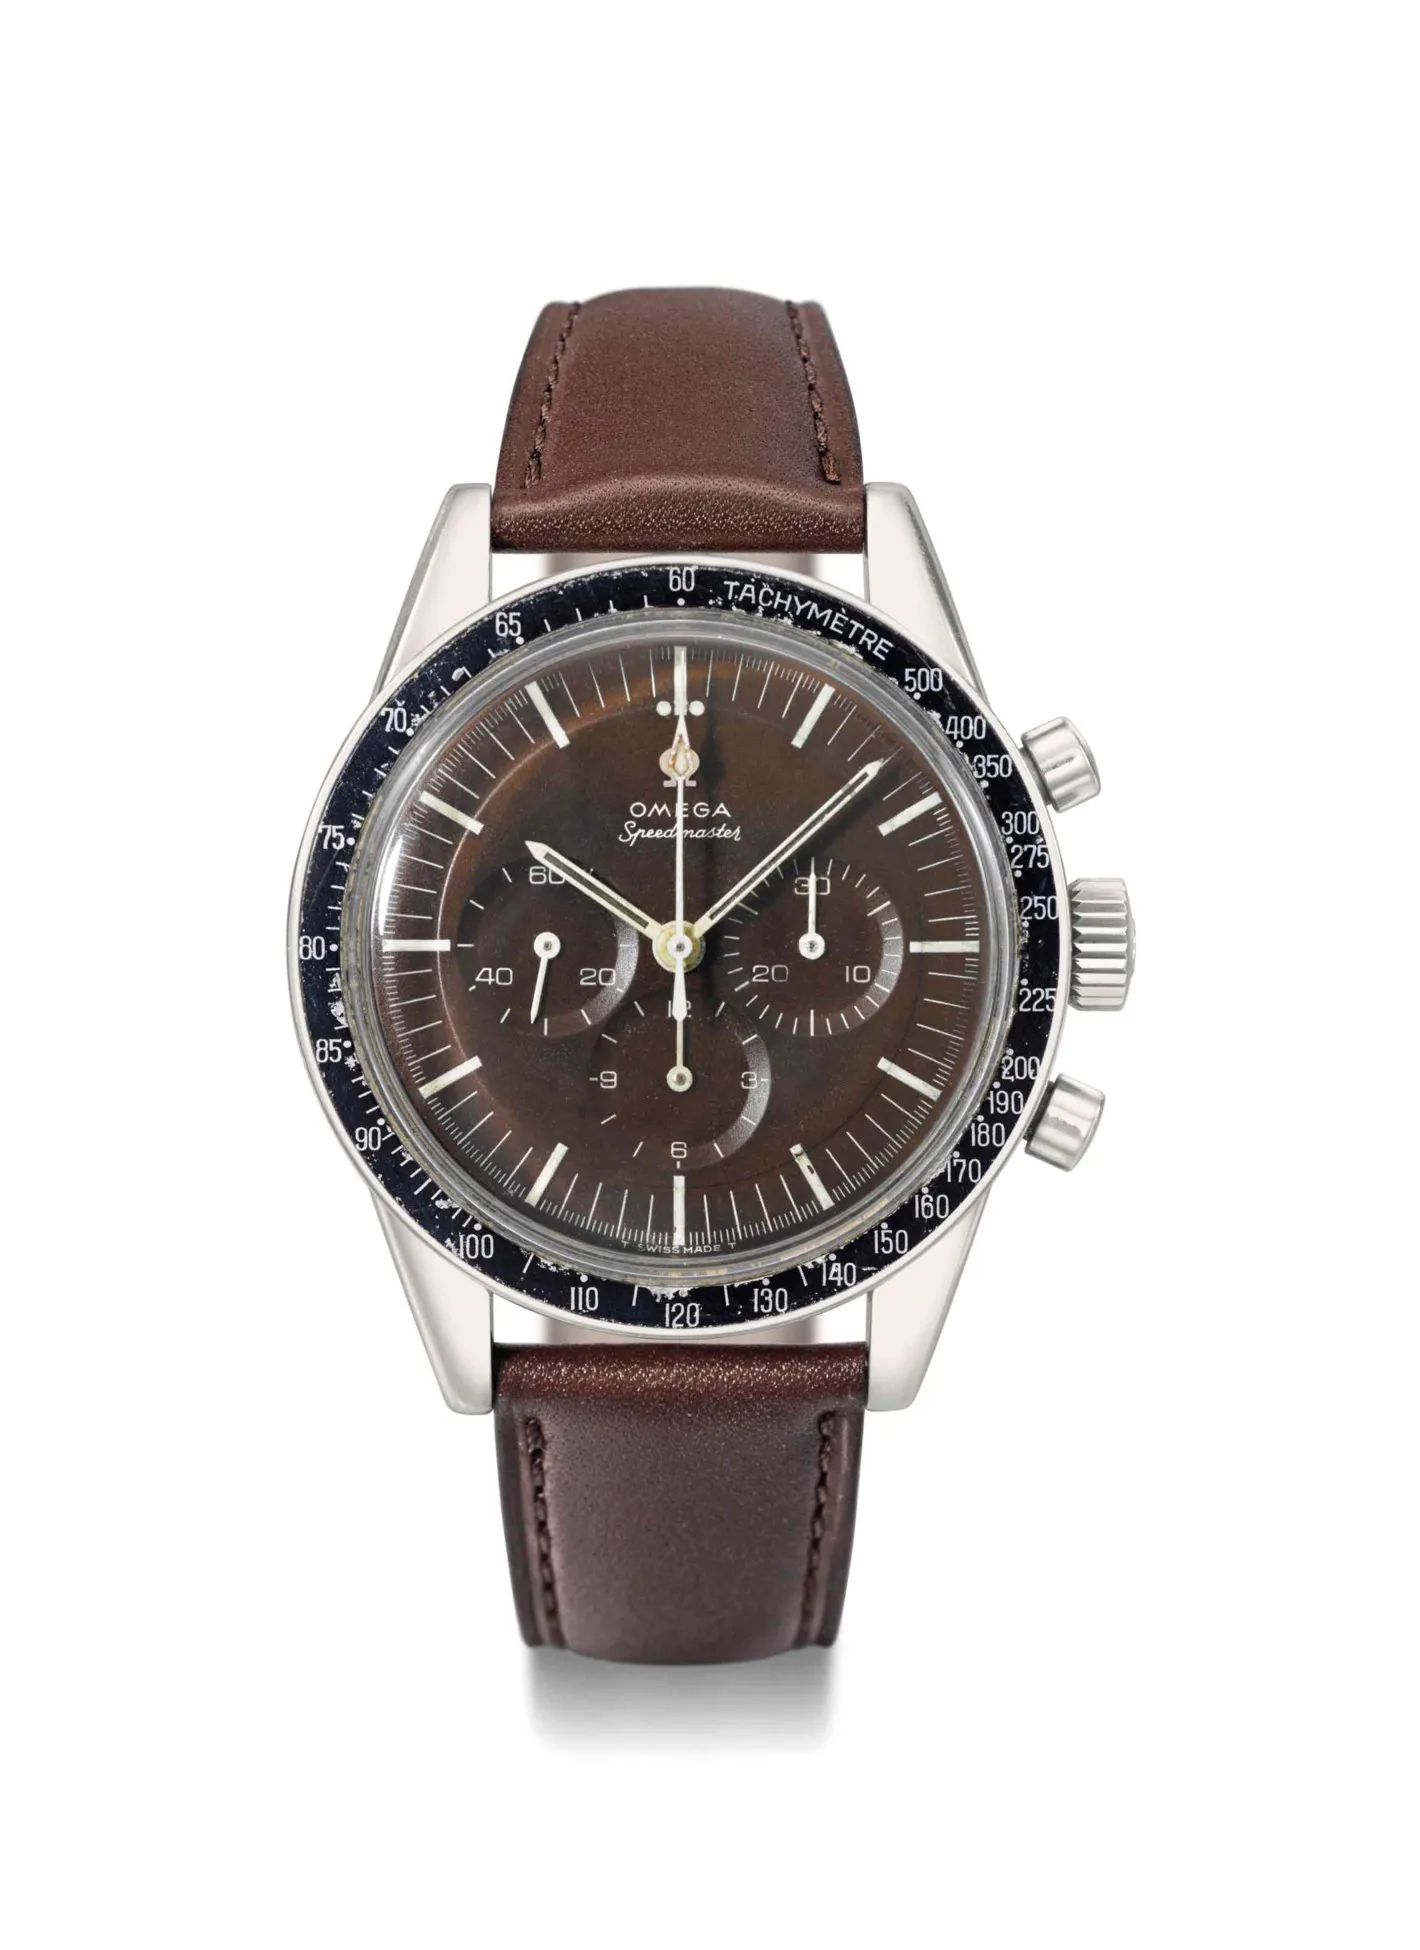 Omega Speedmaster Professional Moonwatch S 105.003-64 38mm Stainless steel Brown